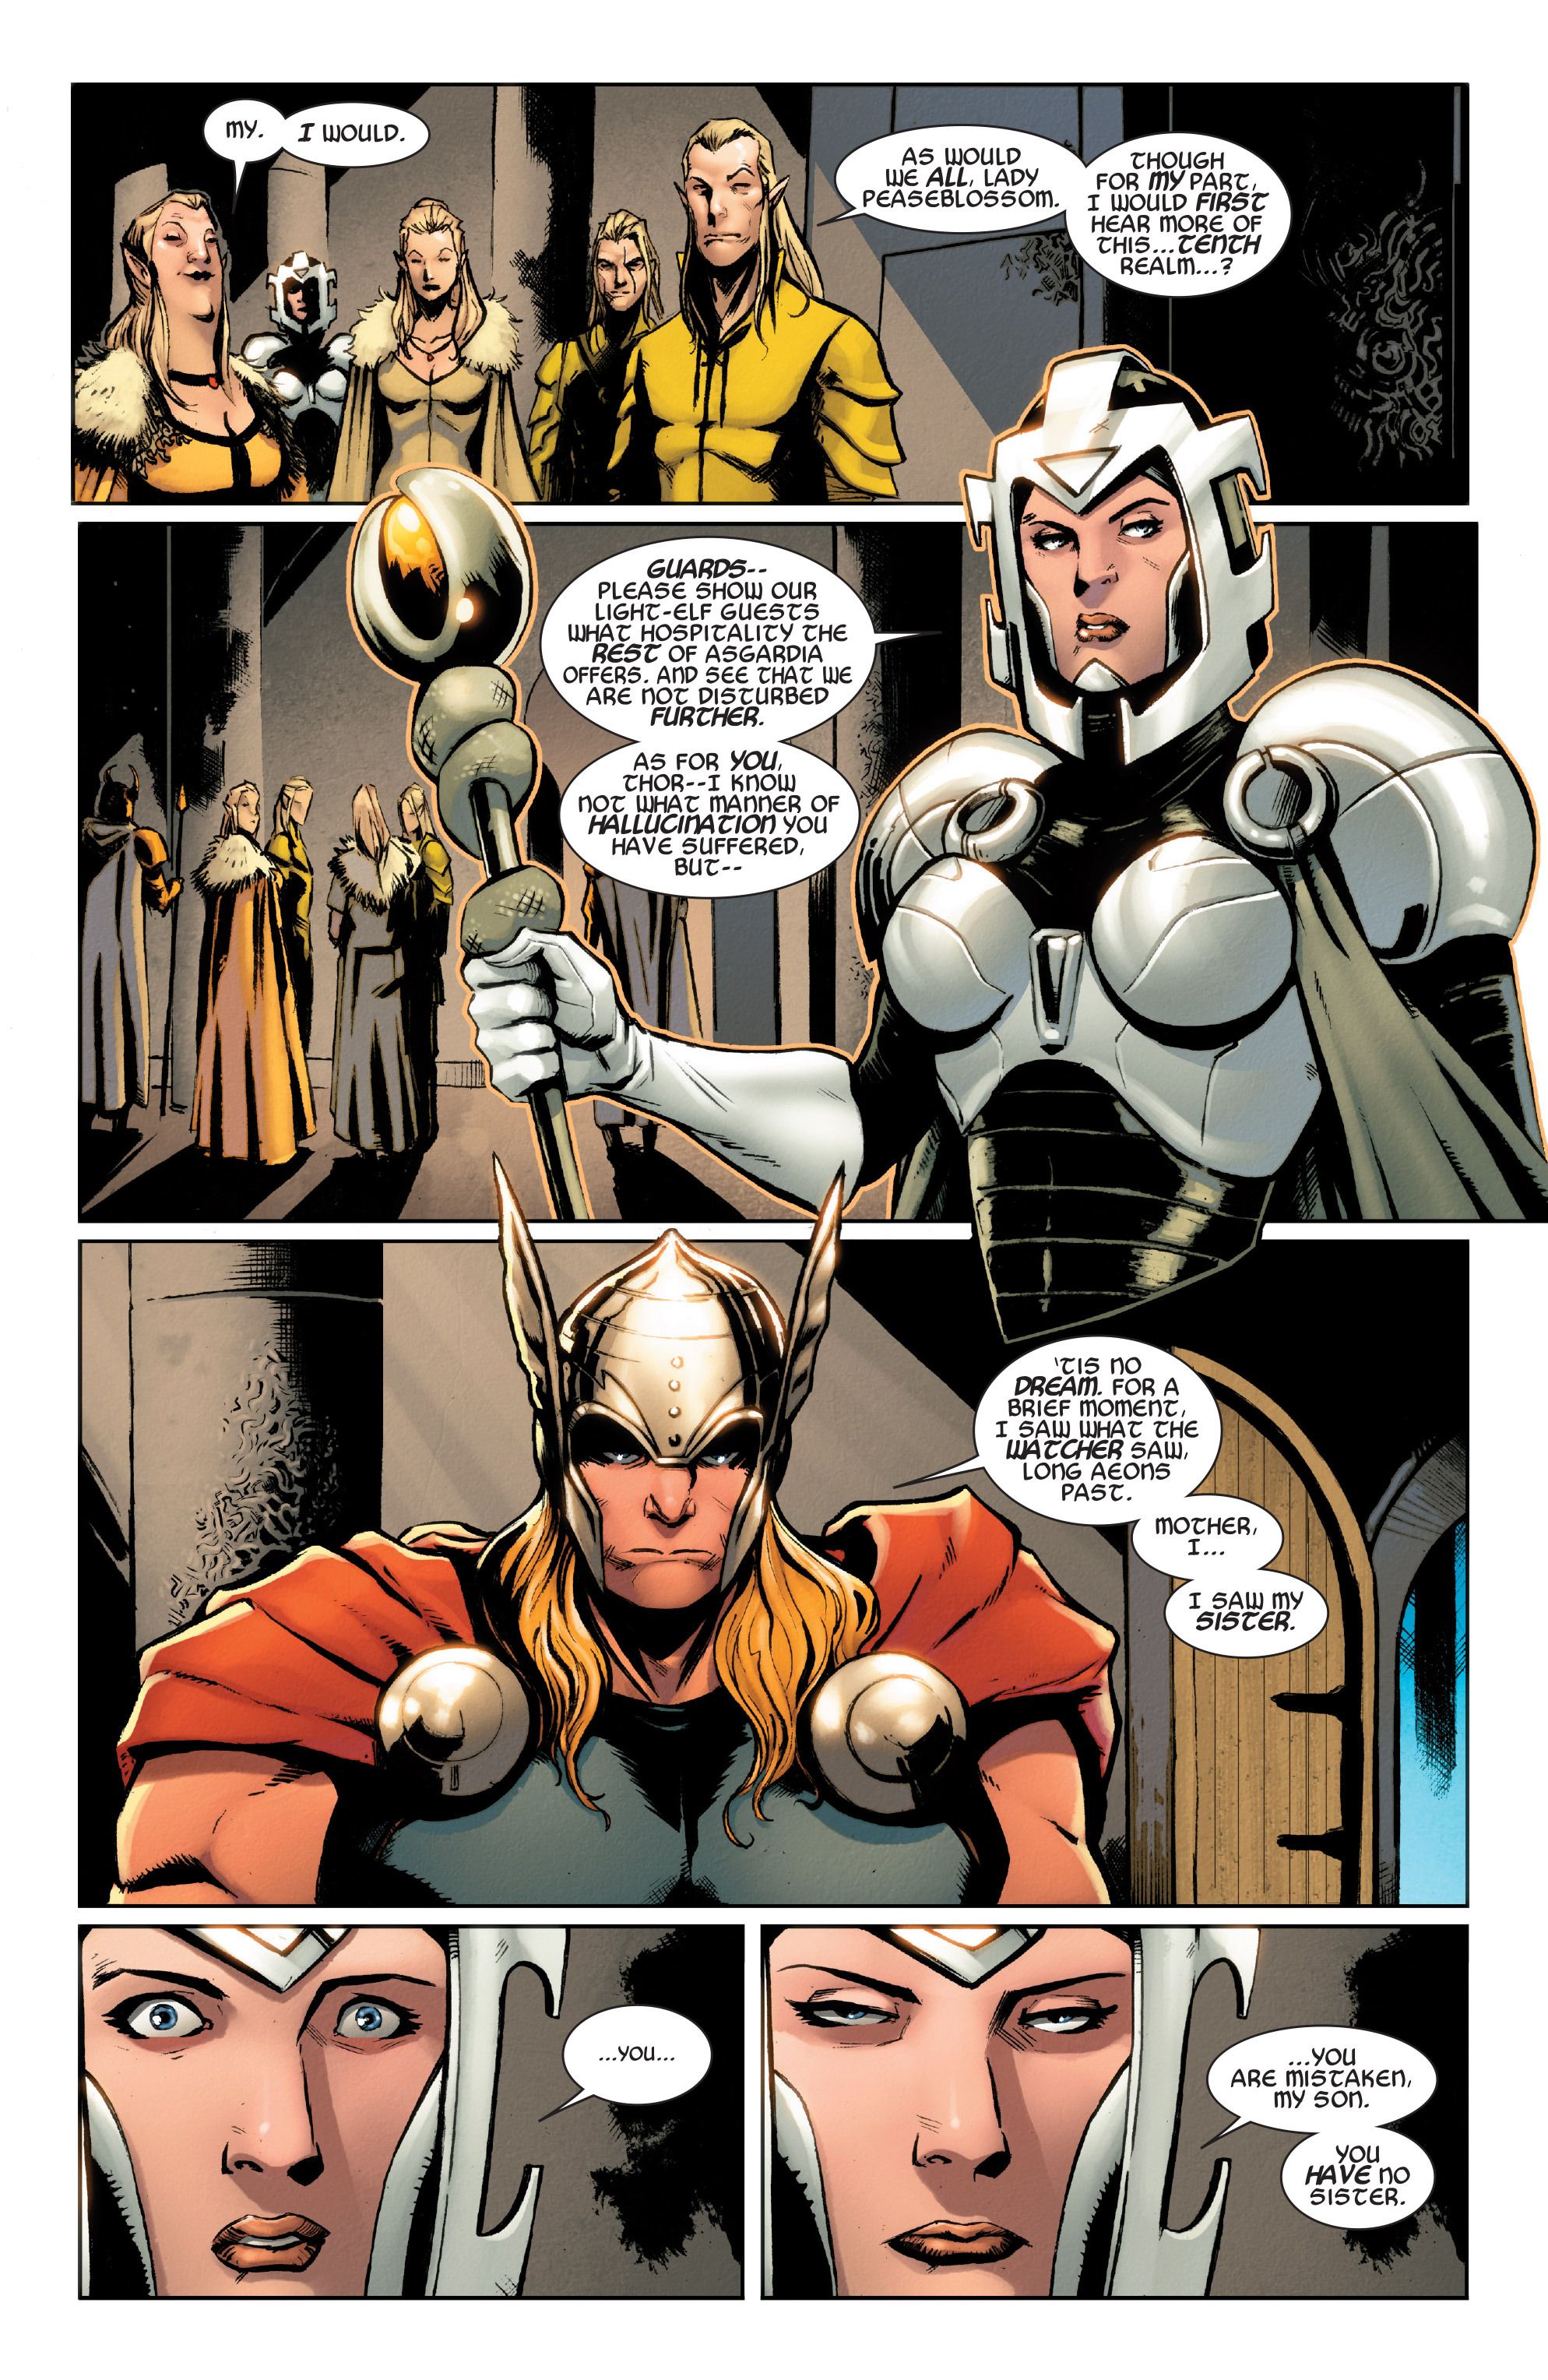 Thor warns about the Tenth World